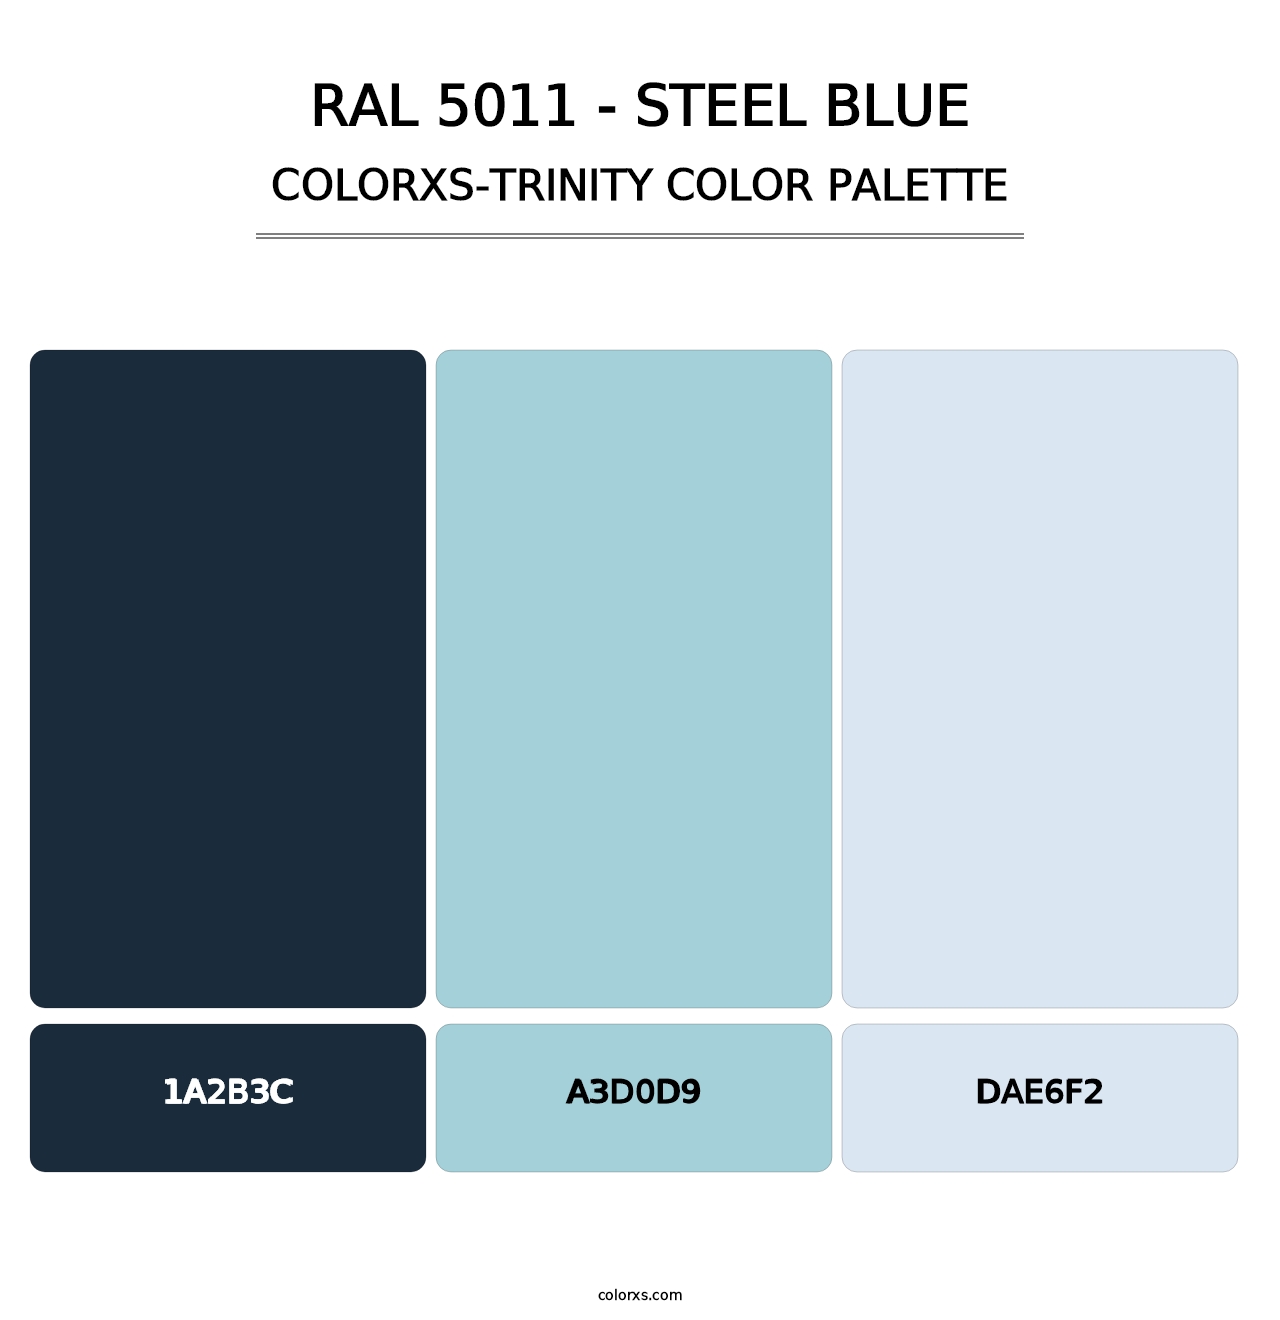 RAL 5011 - Steel Blue - Colorxs Trinity Palette